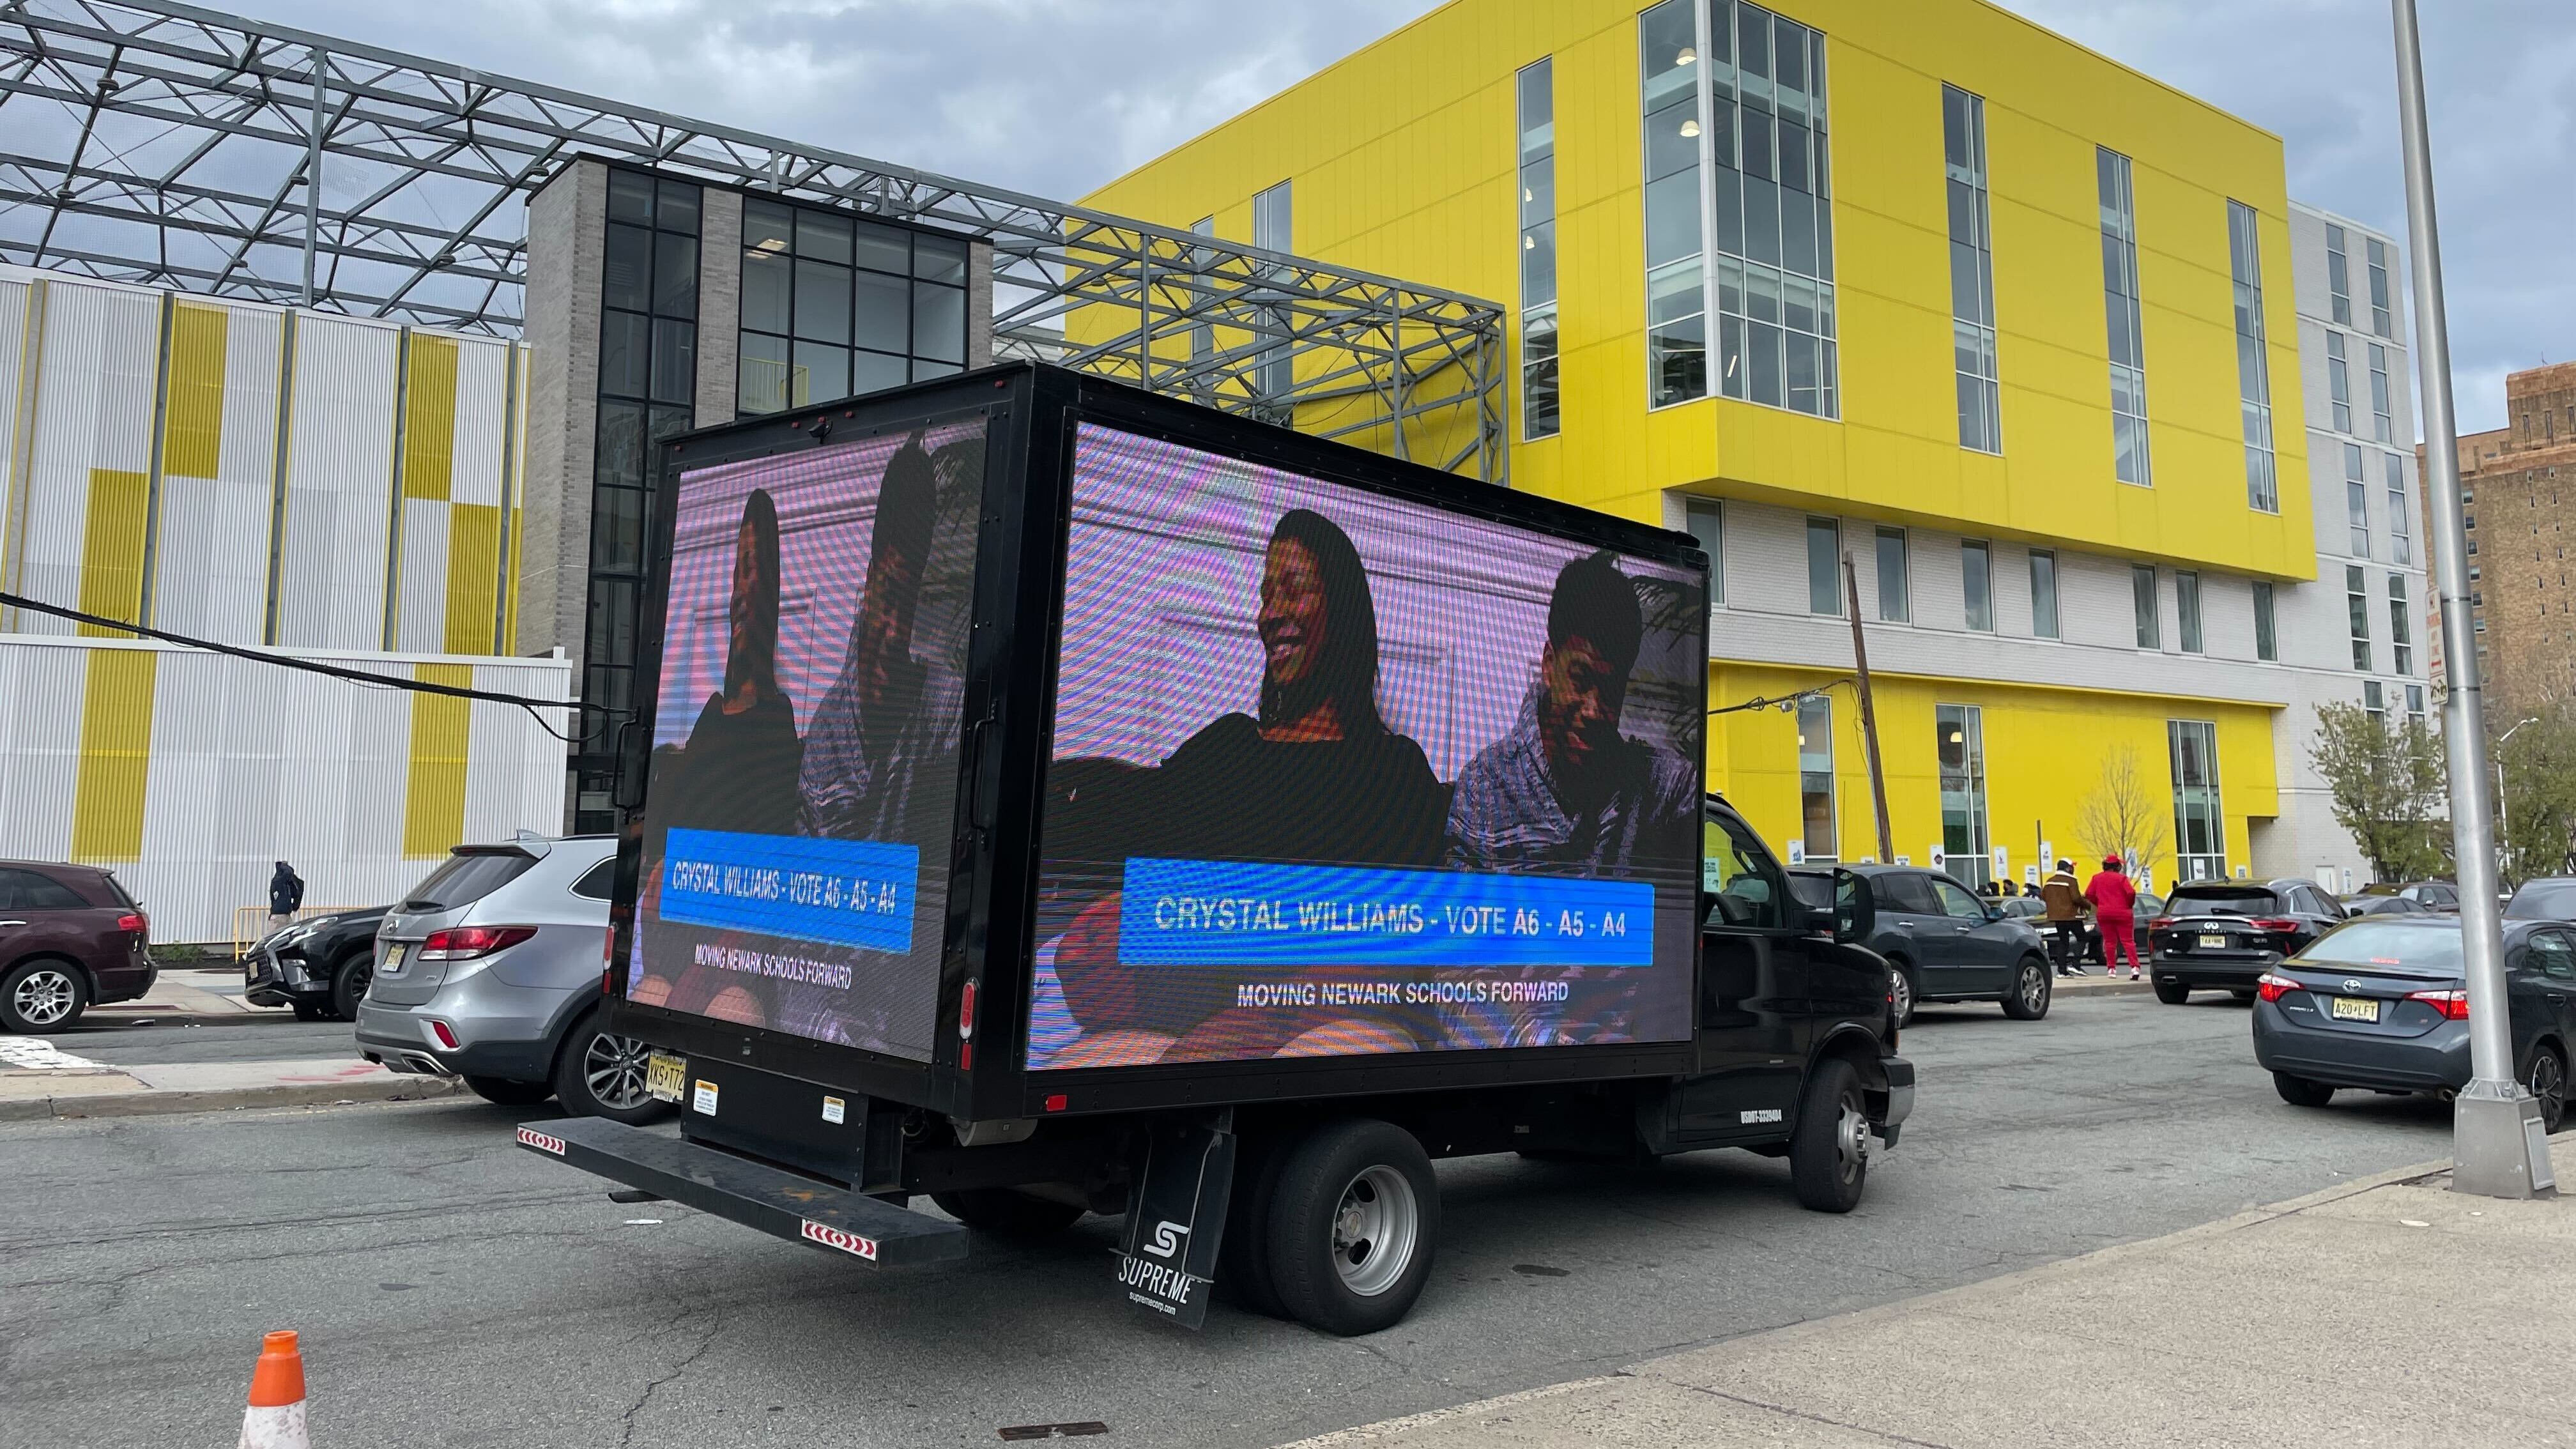 A truck displaying a video loop of newcomer candidate Crystal Williams, one of three on the Moving Newark Schools Forward slate, was seen parked outside of Lincoln Park High School, a North Star Academy school.